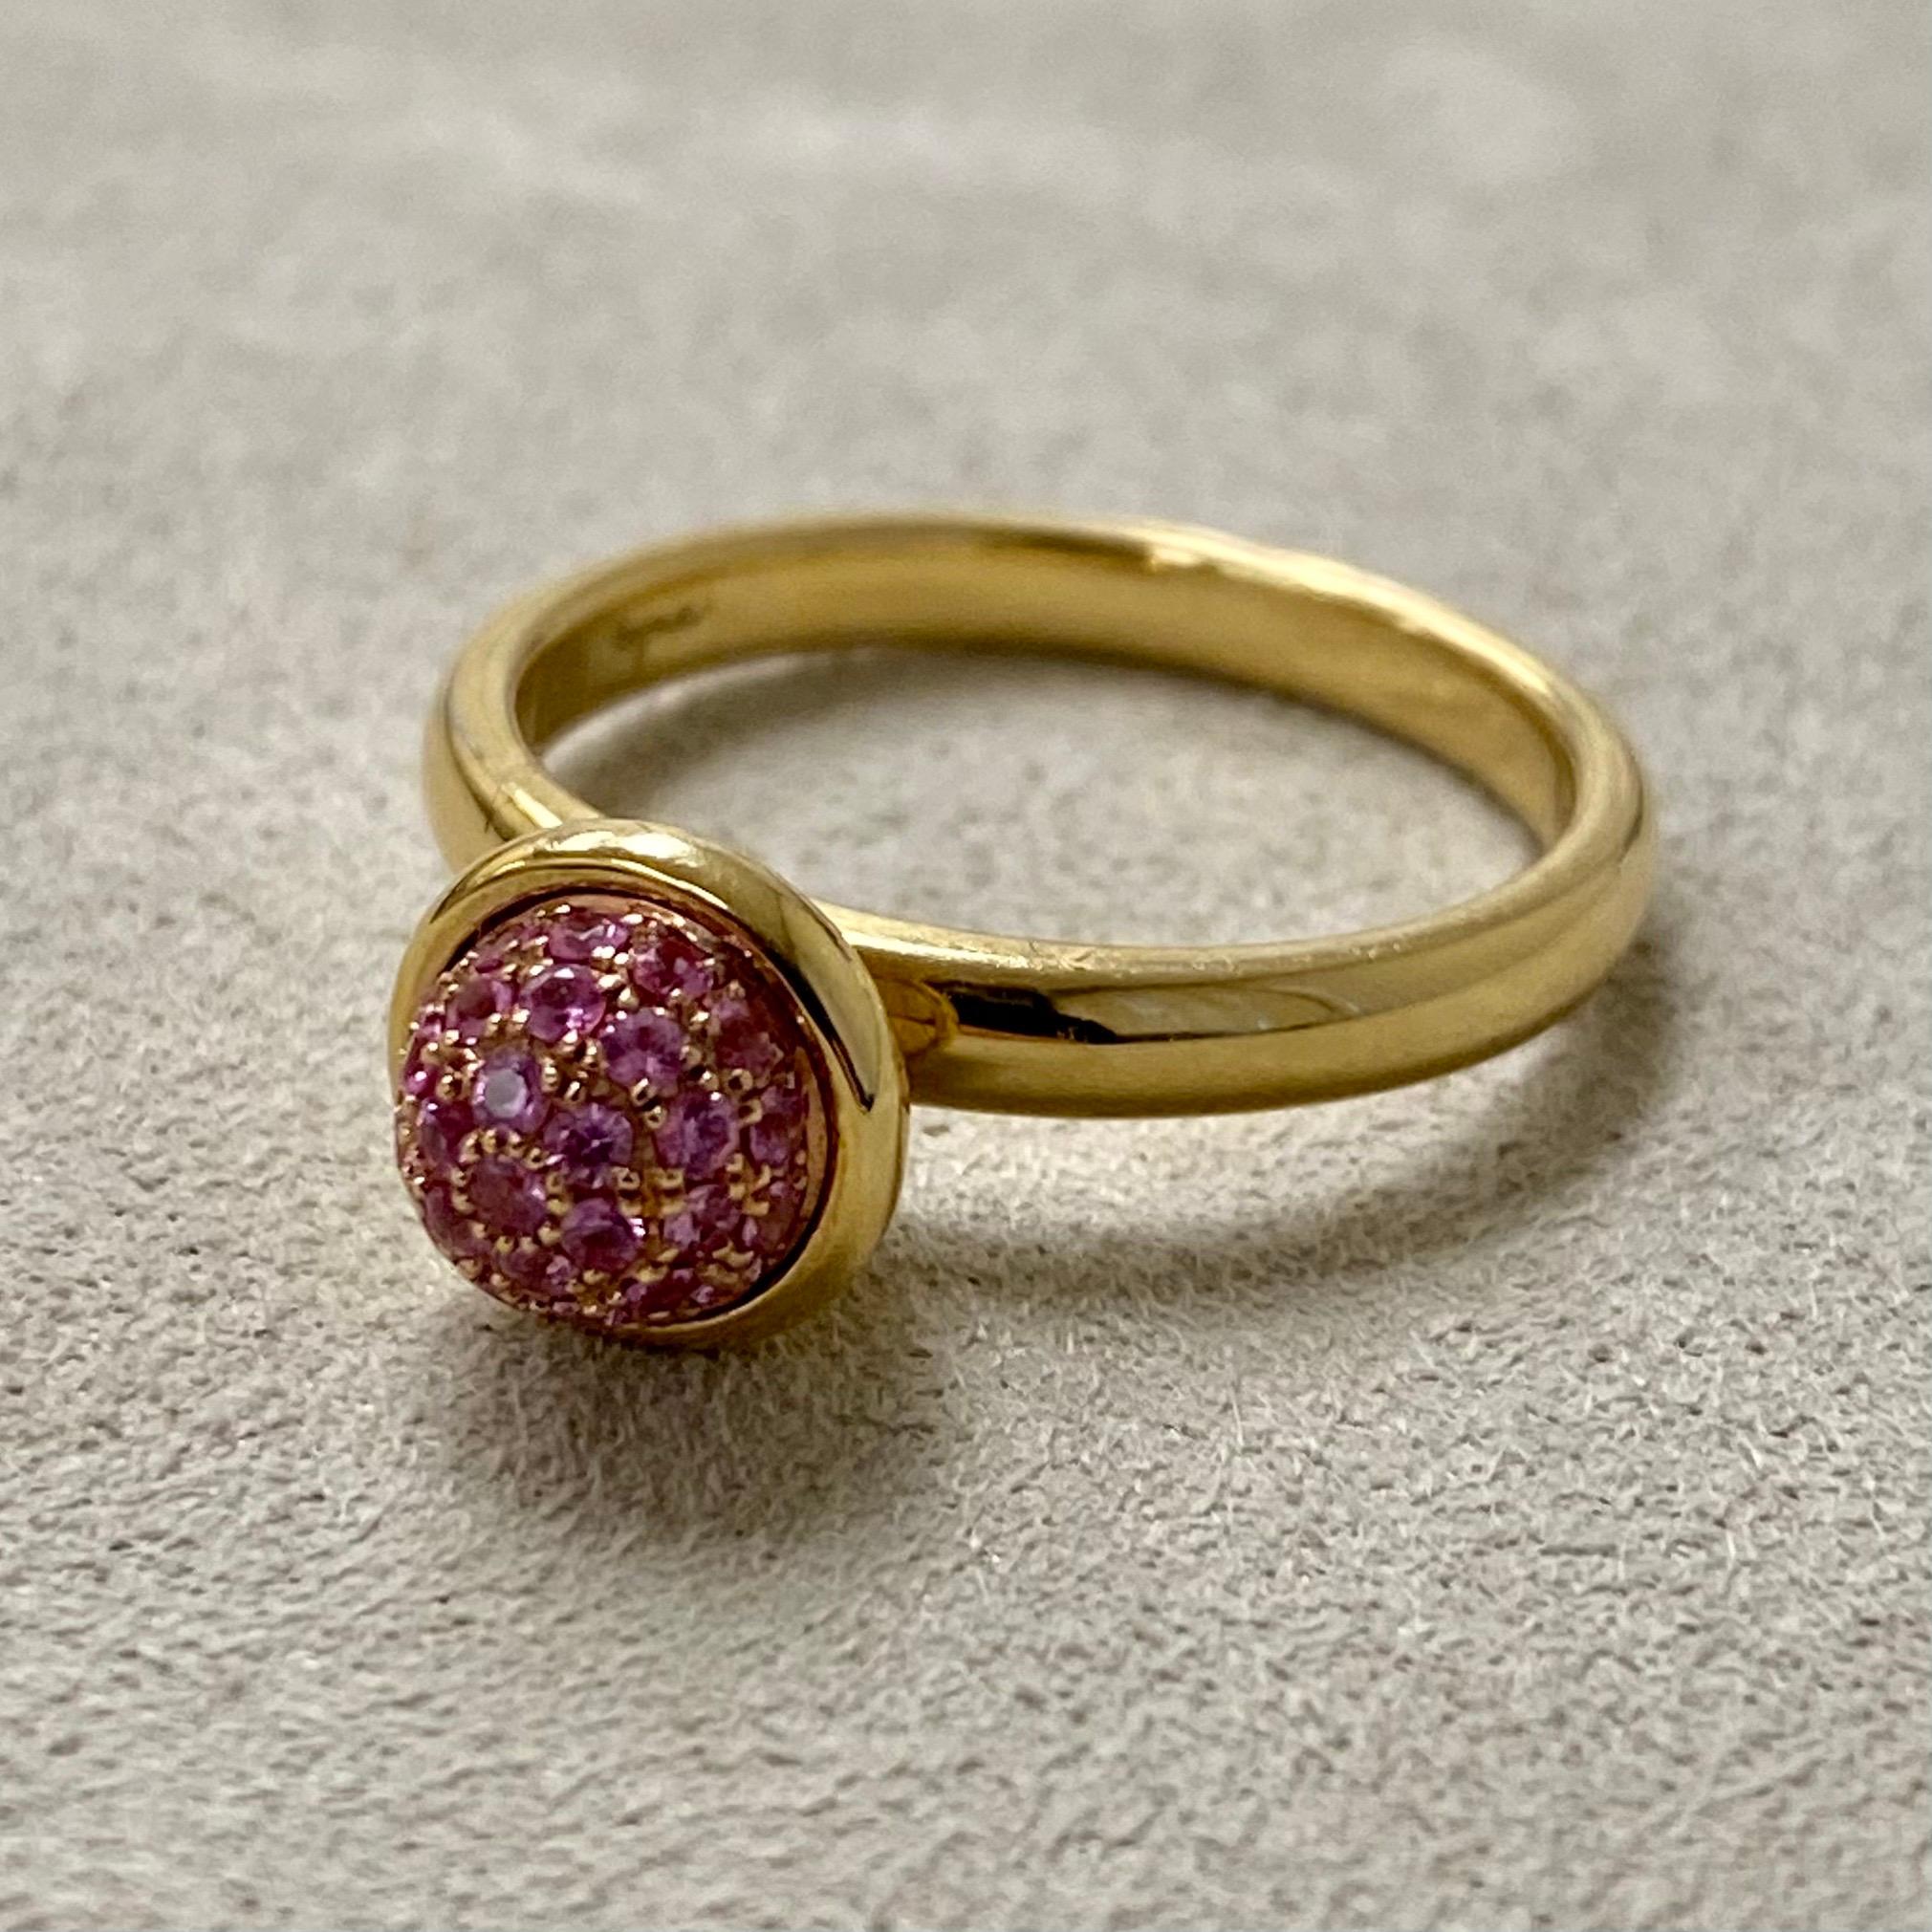 Created in 18 karat yellow gold
Pink sapphires 0.30 carat approx.
Pink sapphire pave ring 8 mm diameter approx.
Ring size US 6.5, can be sized upon request.

Crafted from 18 karat yellow gold, this striking ring features 0.30 carat of glimmering